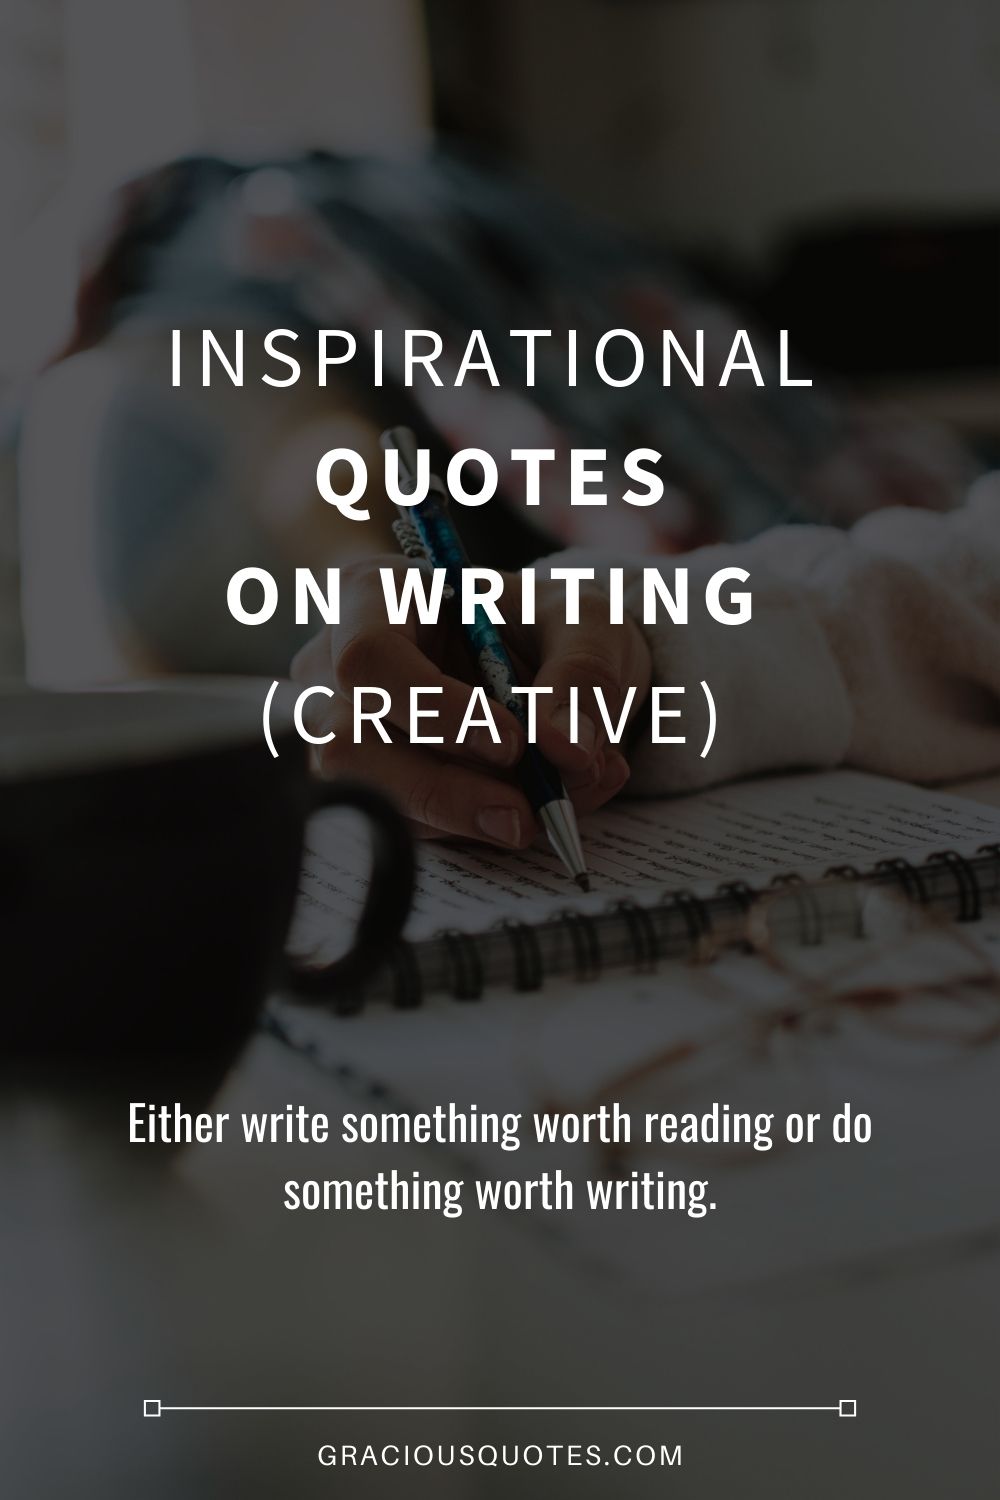 Inspirational Quotes on Writing (CREATIVE) - Gracious Quotes